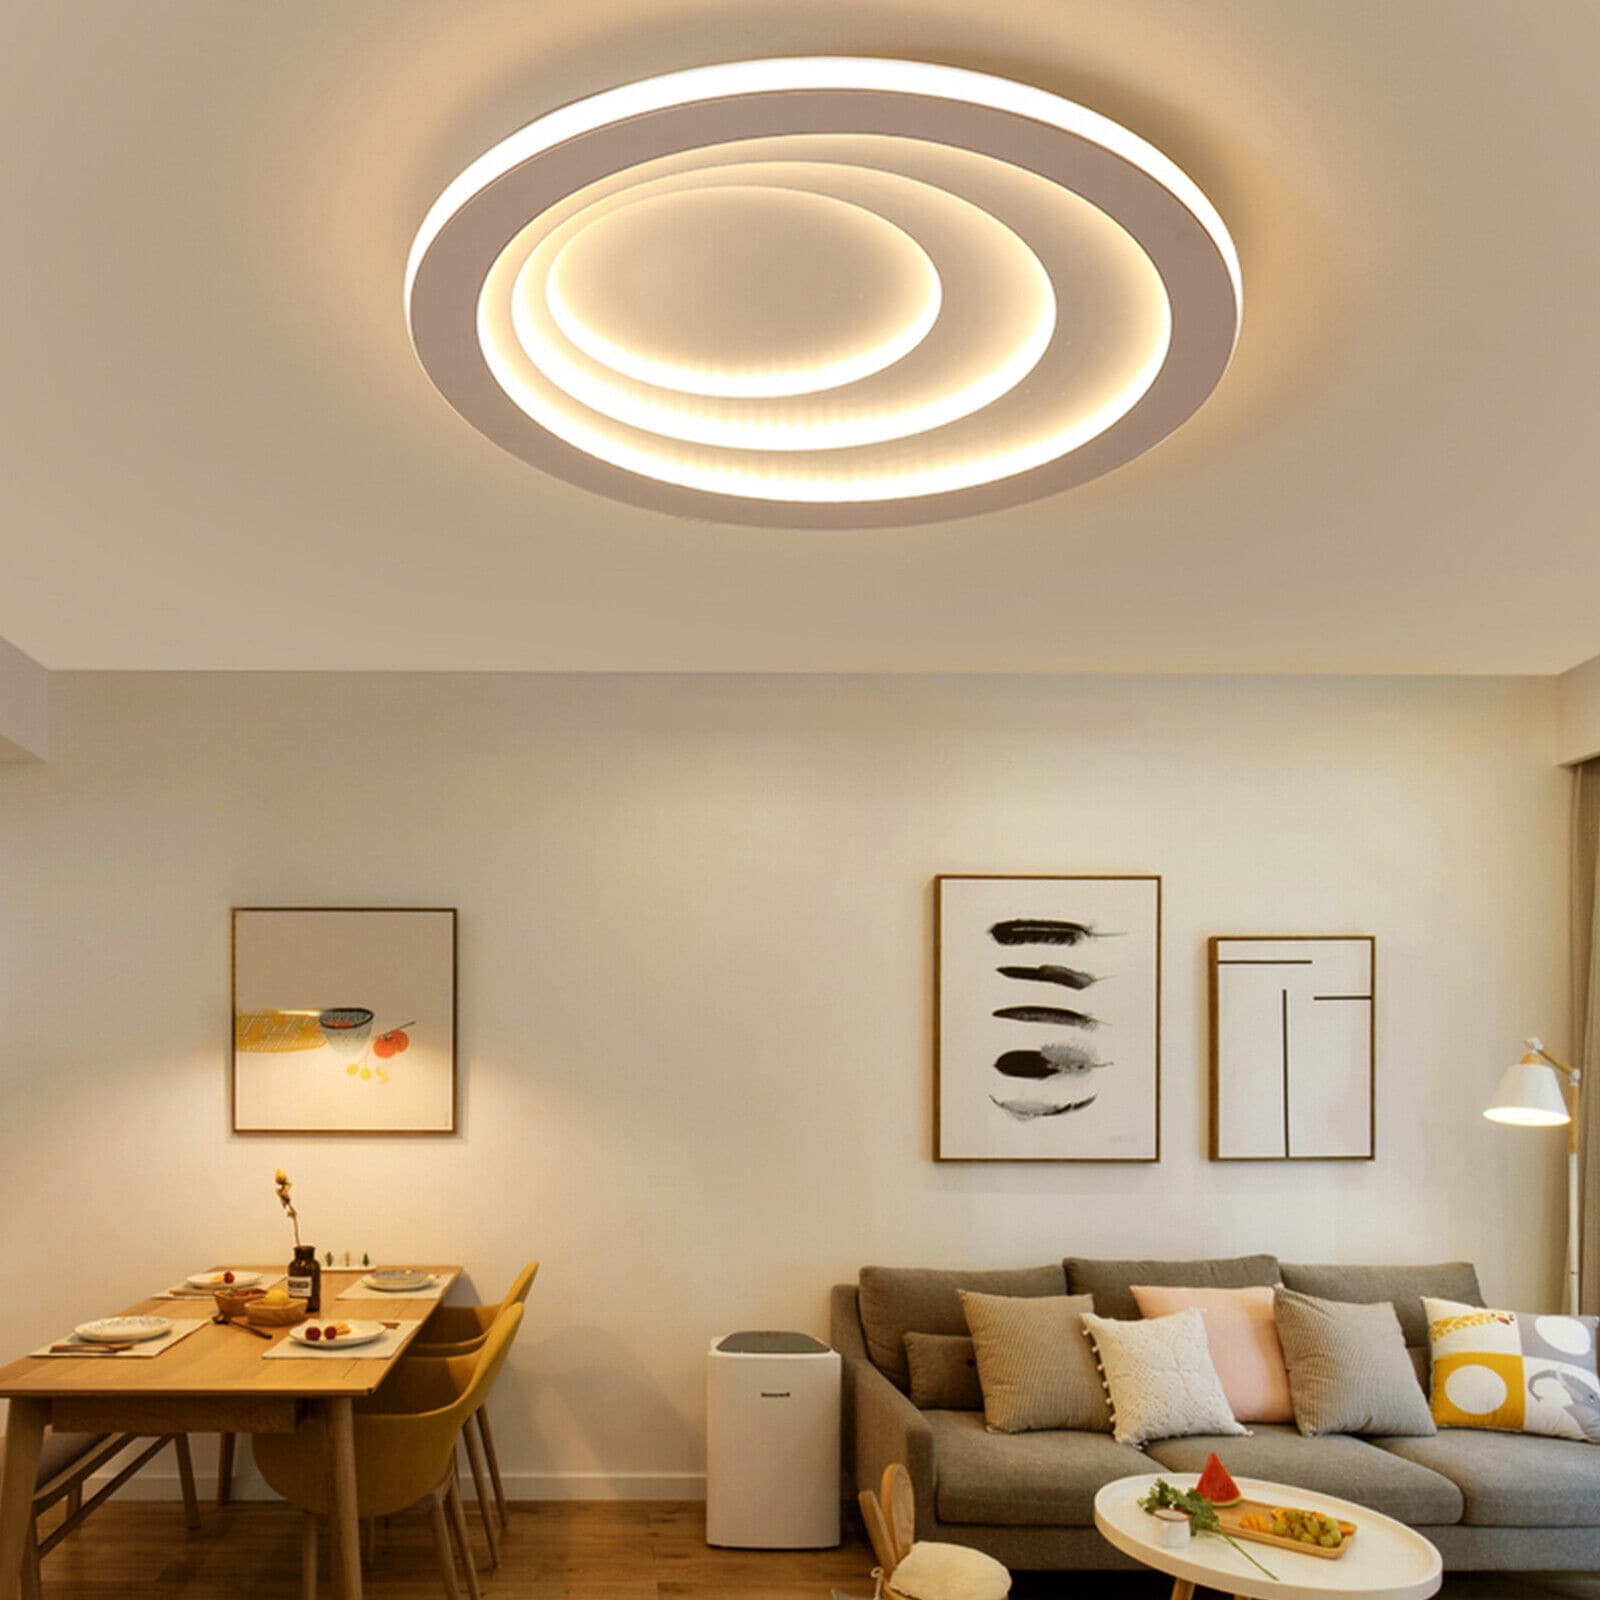 Modern Round Dimmable to Ceiling Lamp for Childrenundefineds Bedroom - 19.7" Sale - - 36019730